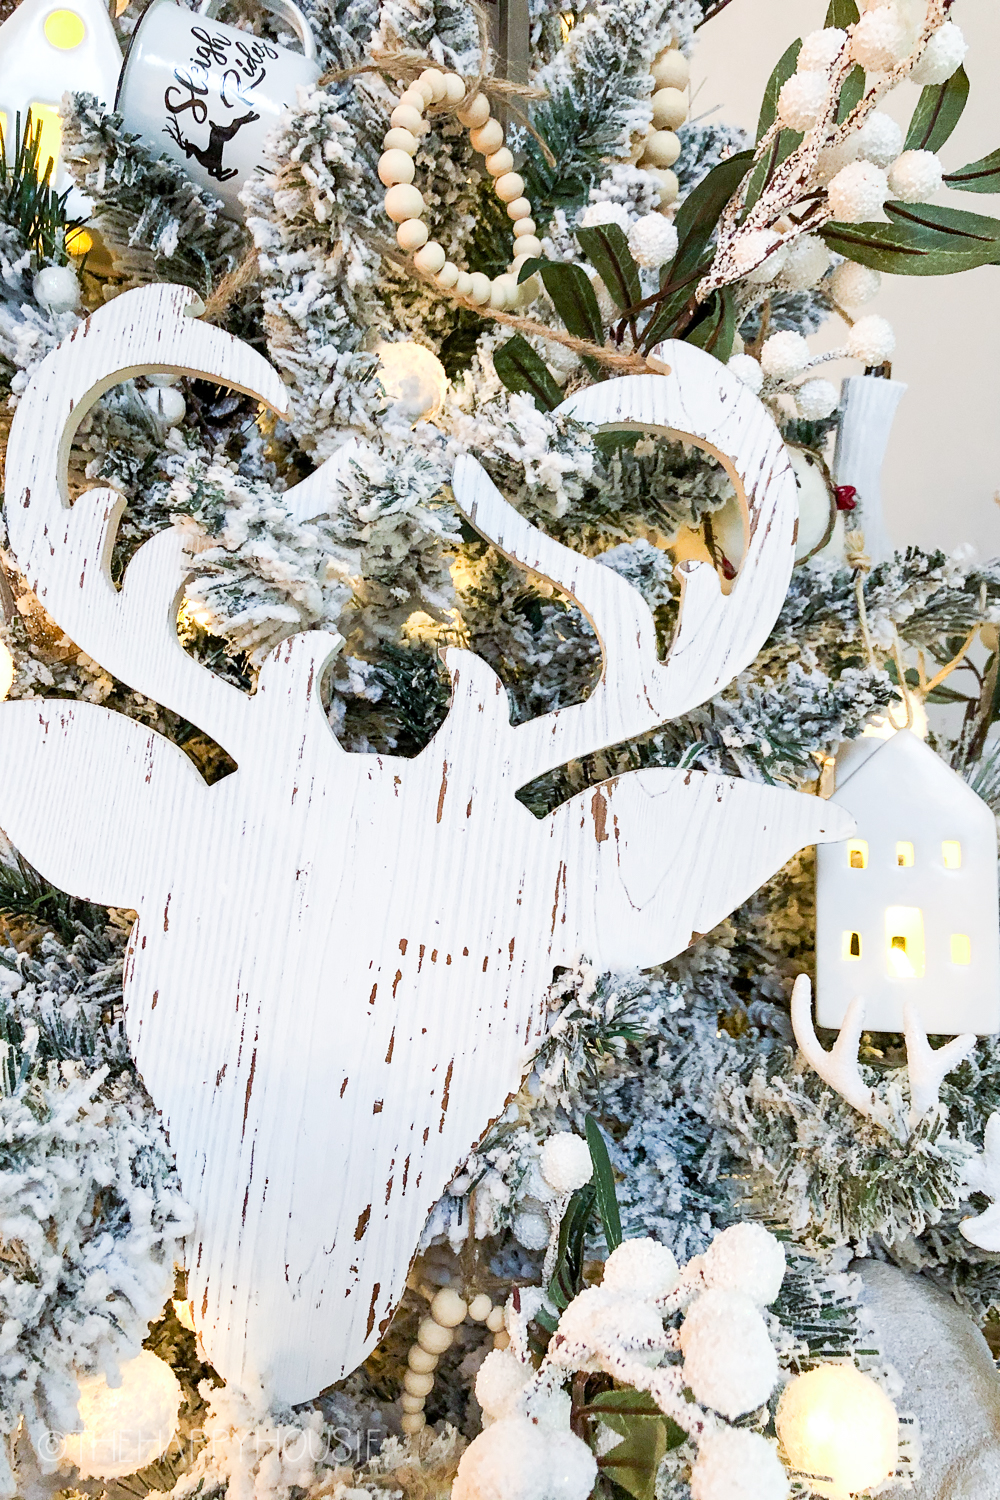 A wooden deer with antlers painted rustic white on the tree.